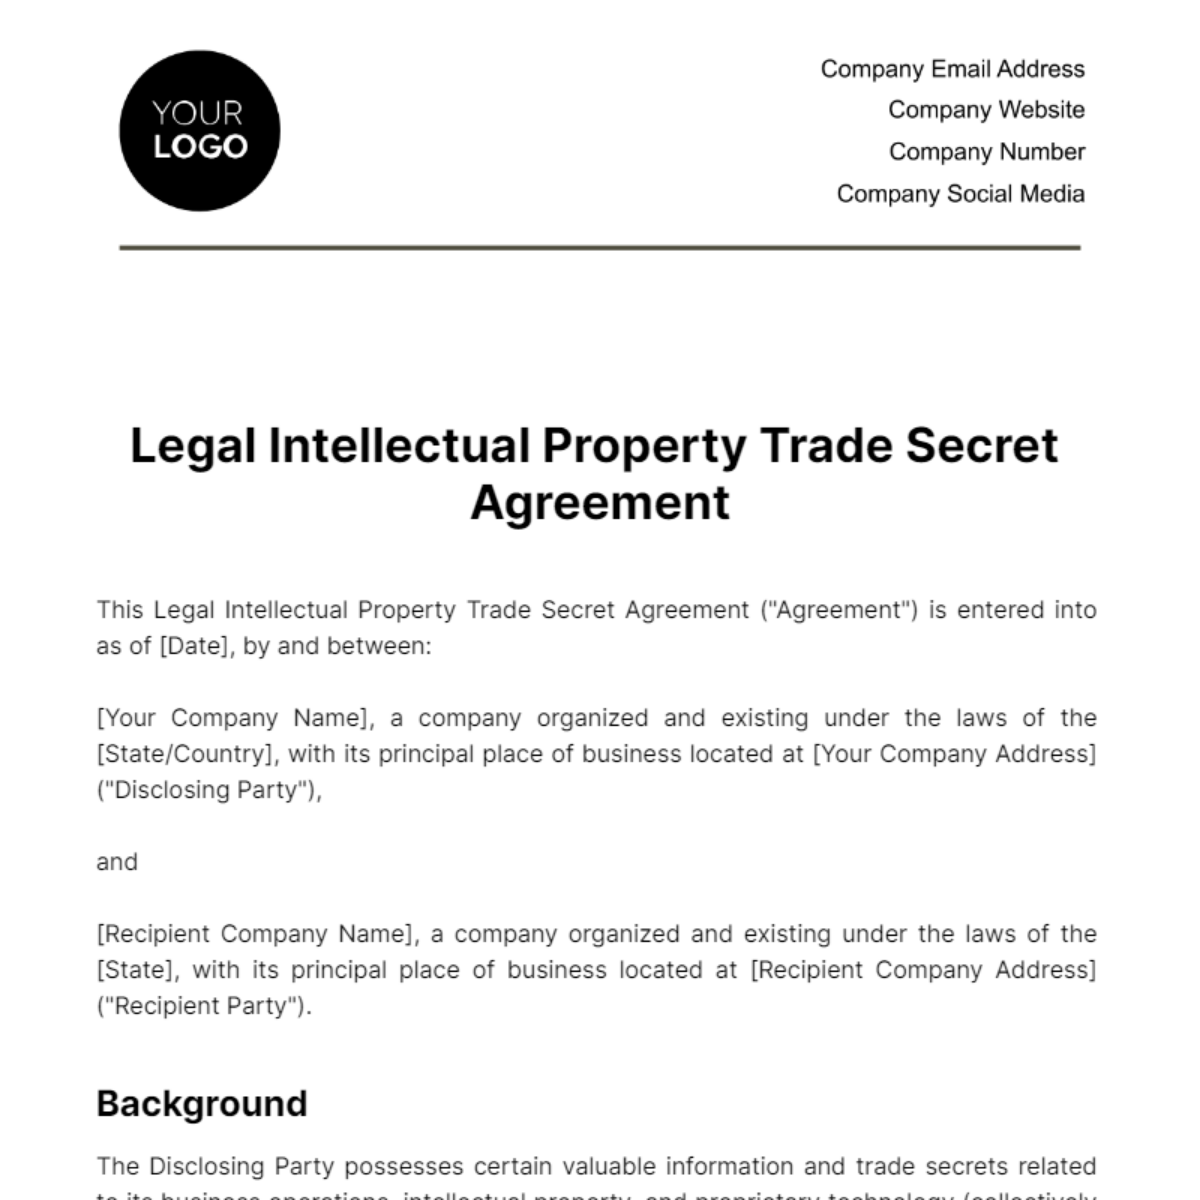 Free Legal Intellectual Property Trade Secret Agreement Template